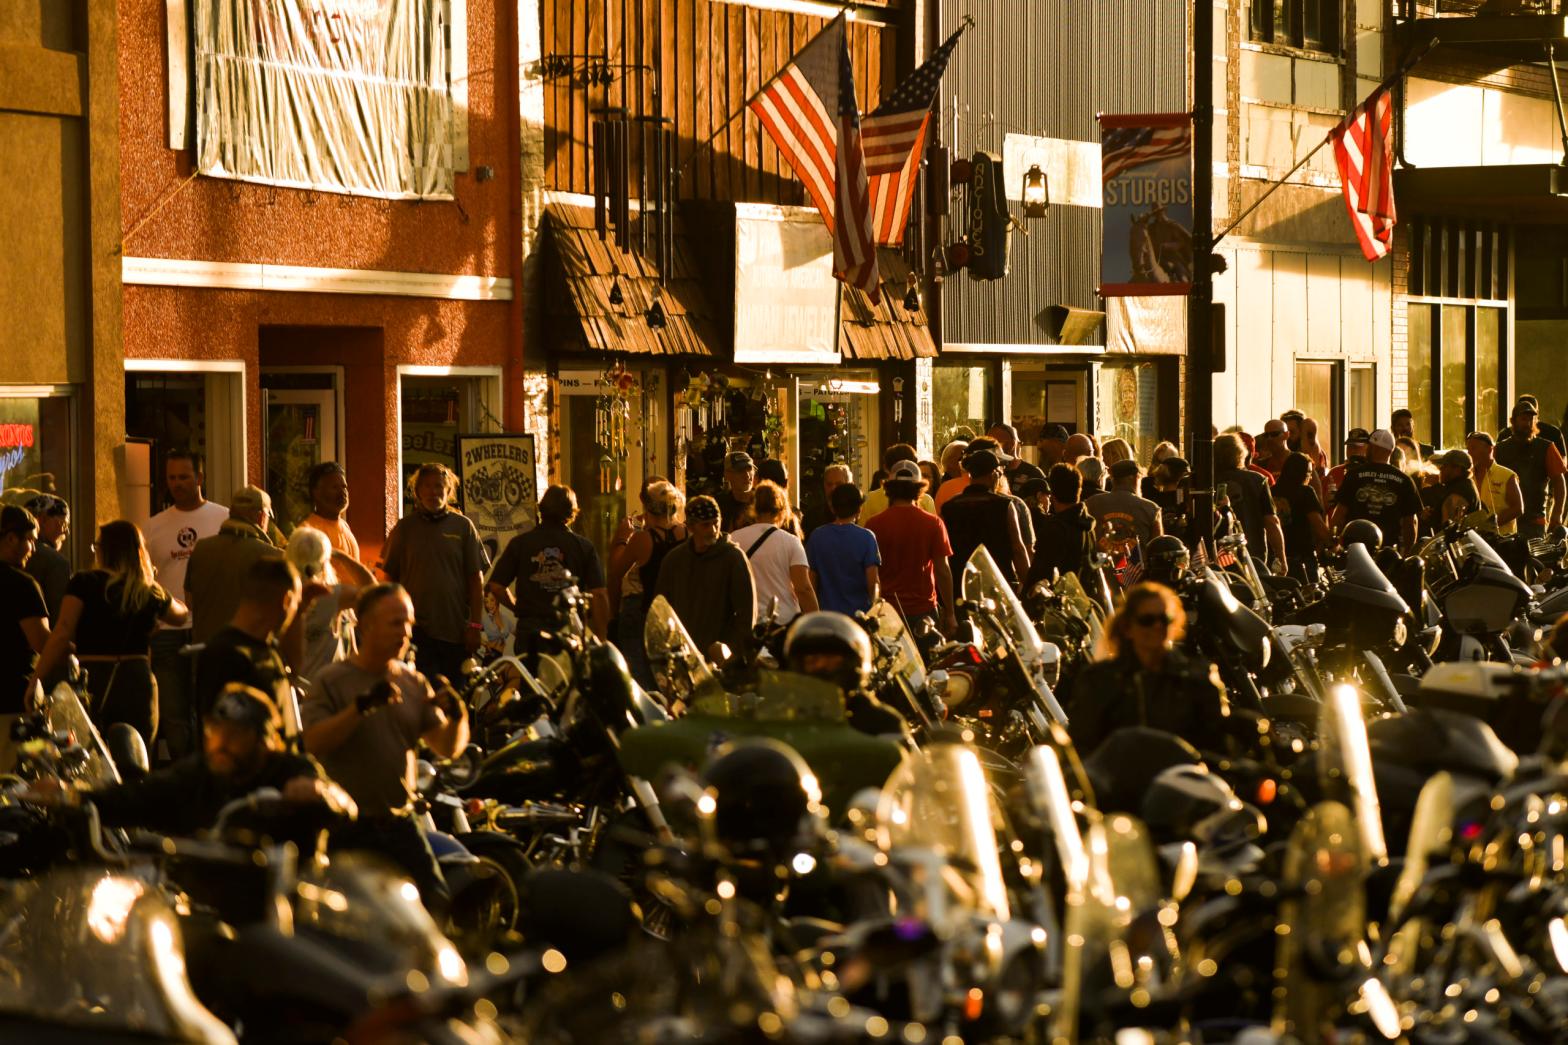 People walking along Main Street during the 80th Annual Sturgis Motorcycle Rally in Sturgis, South Dakota on August 8, 2020. (Photo: Michael Ciaglo, Getty Images)